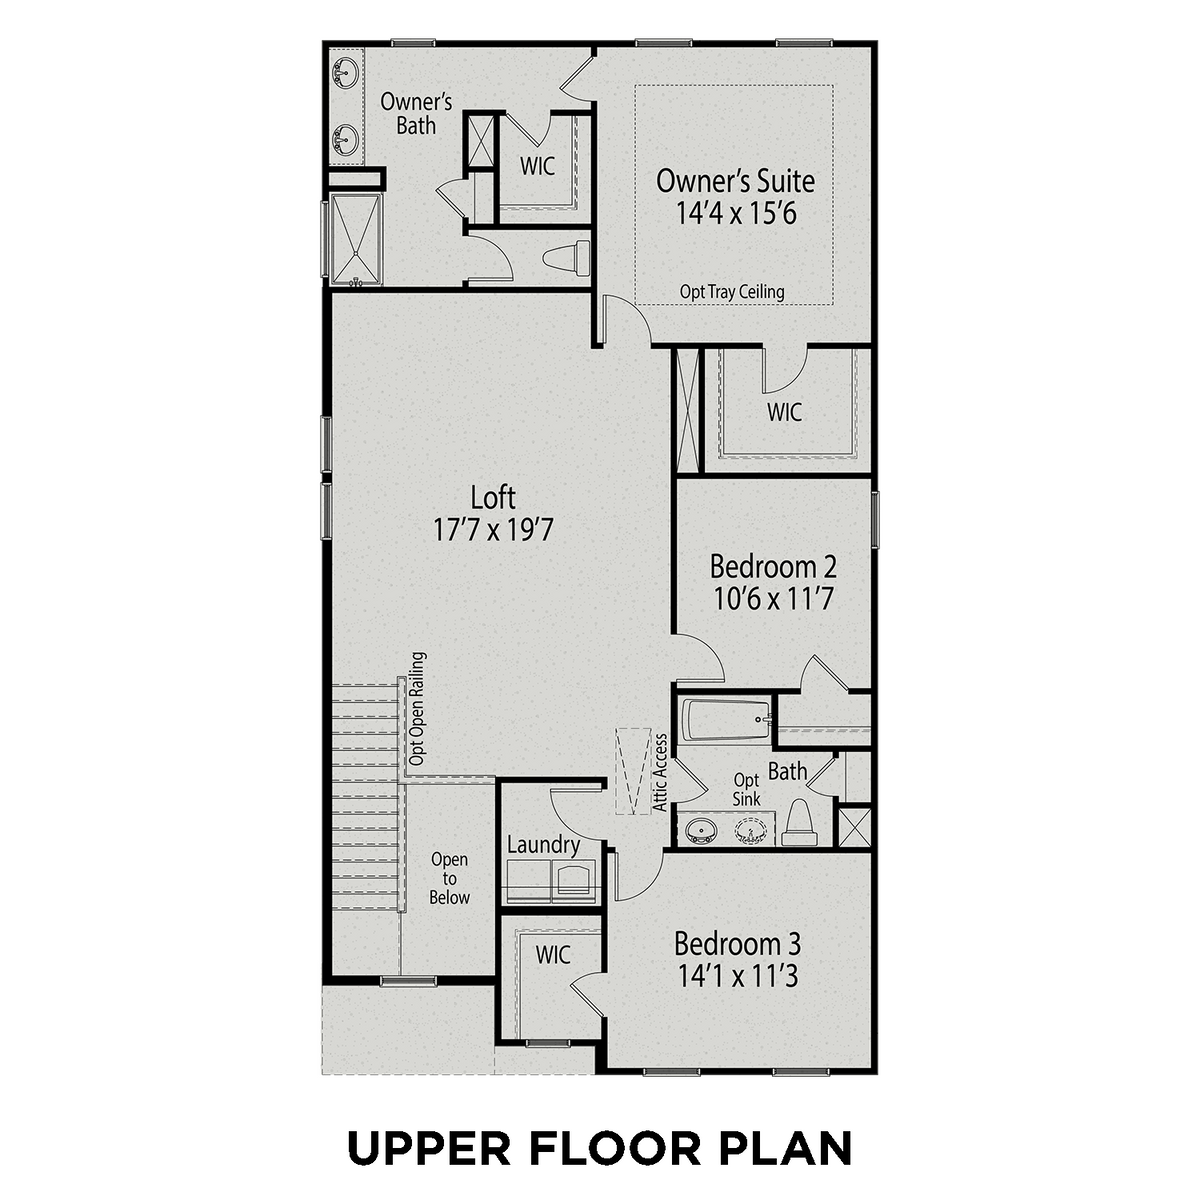 2 - The Adalynn A buildable floor plan layout in Davidson Homes' Gregory Village community.